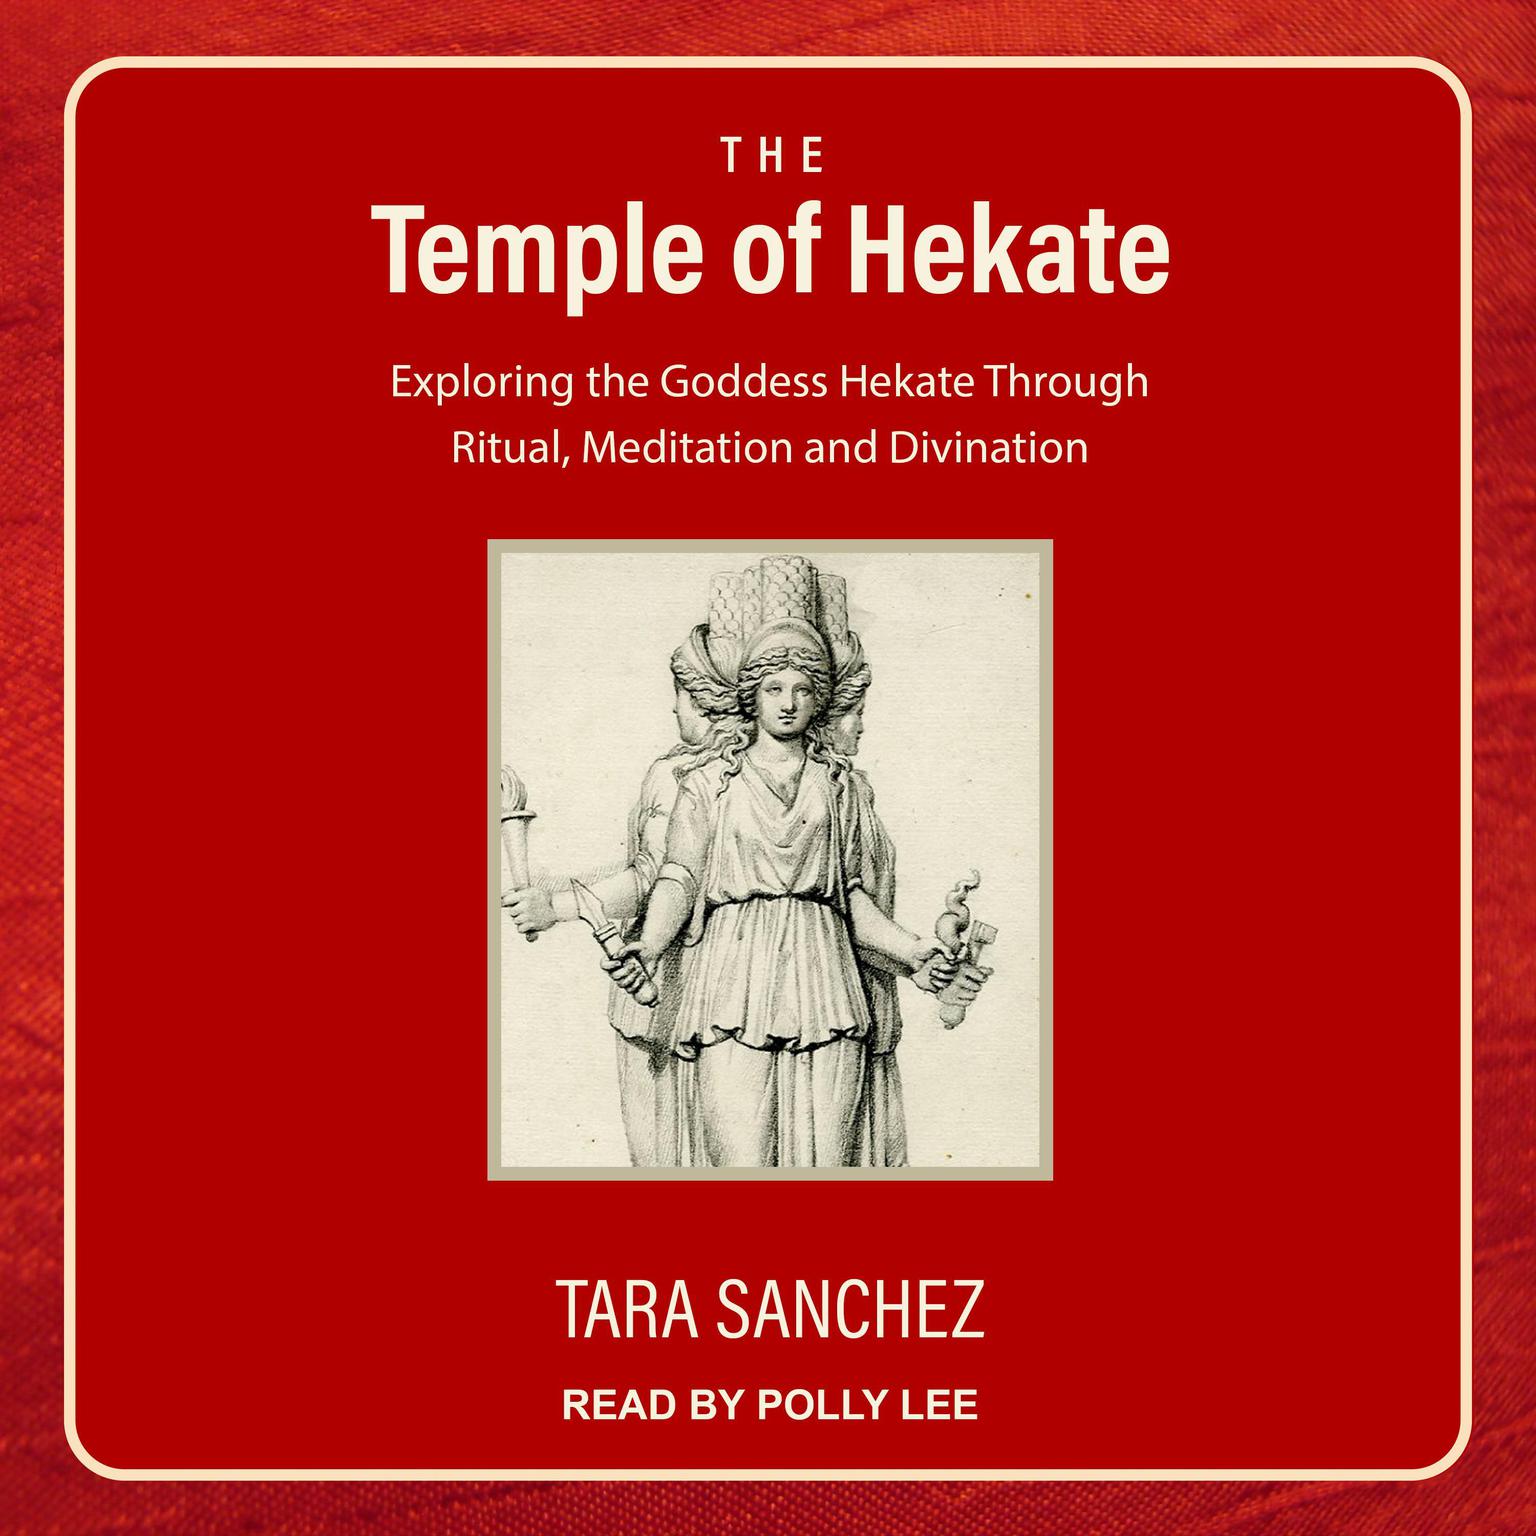 The Temple of Hekate: Exploring the Goddess Hekate Through Ritual, Meditation and Divination Audiobook, by Tara Sanchez